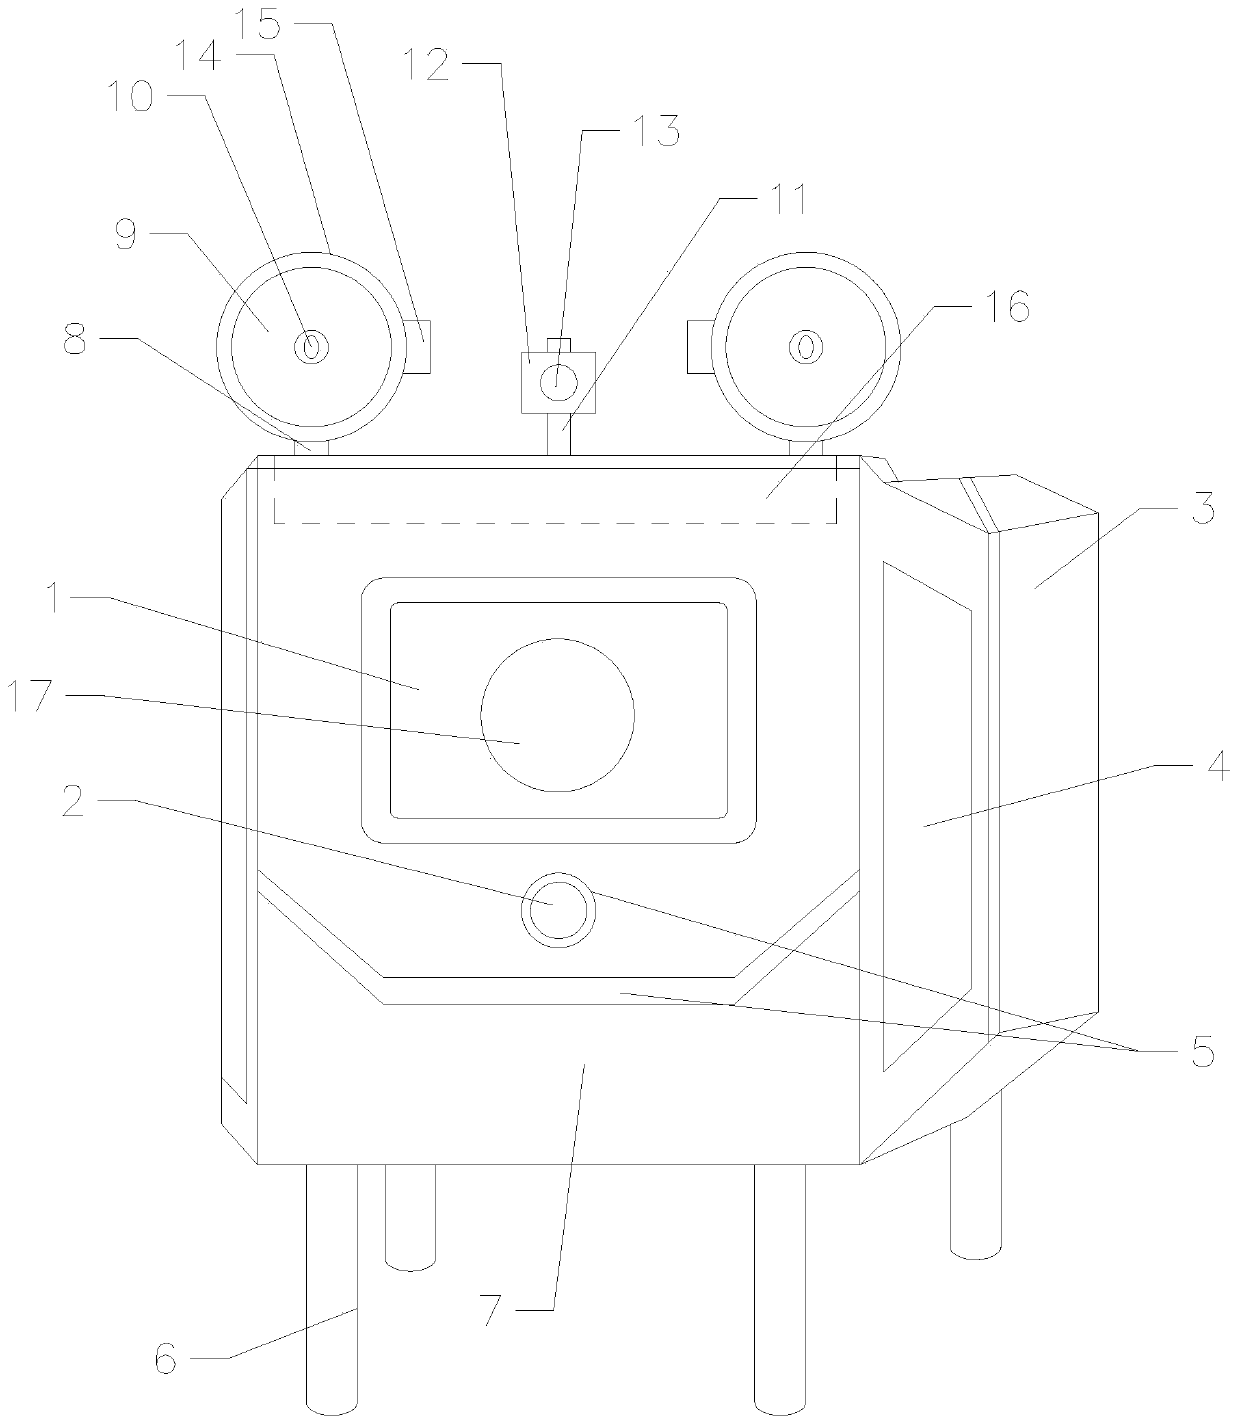 Auxiliary device for improving face recognition payment accuracy